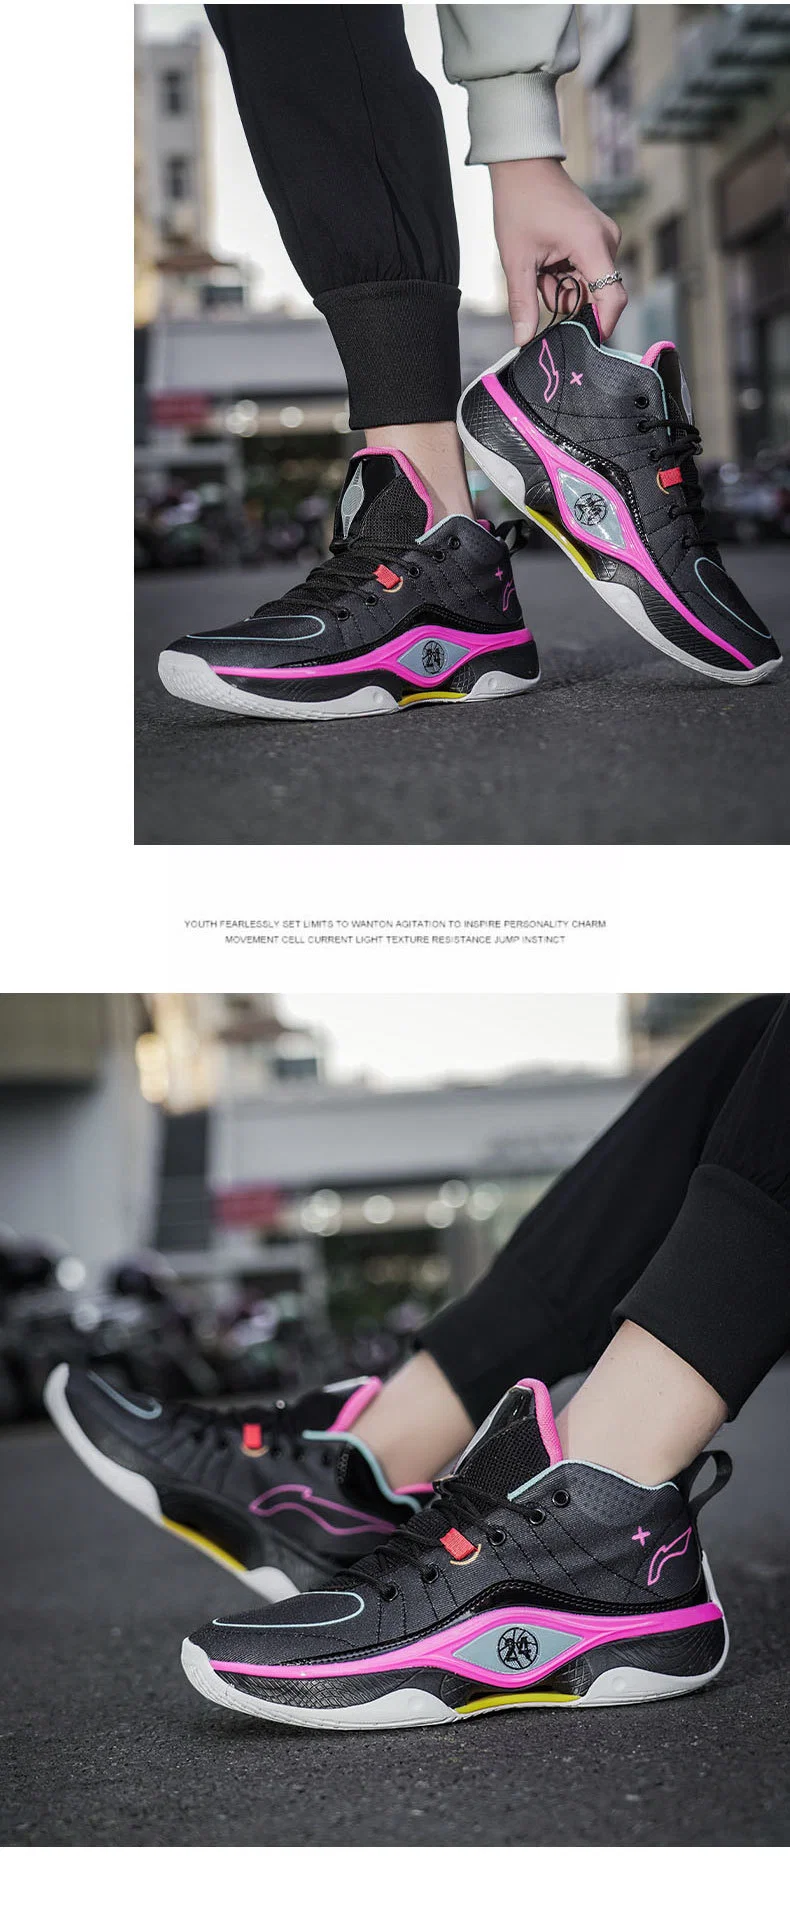 Winter New High Quality Basketball Shoes Carbon Plate Shock Absorption High Elastic Sports Shoes